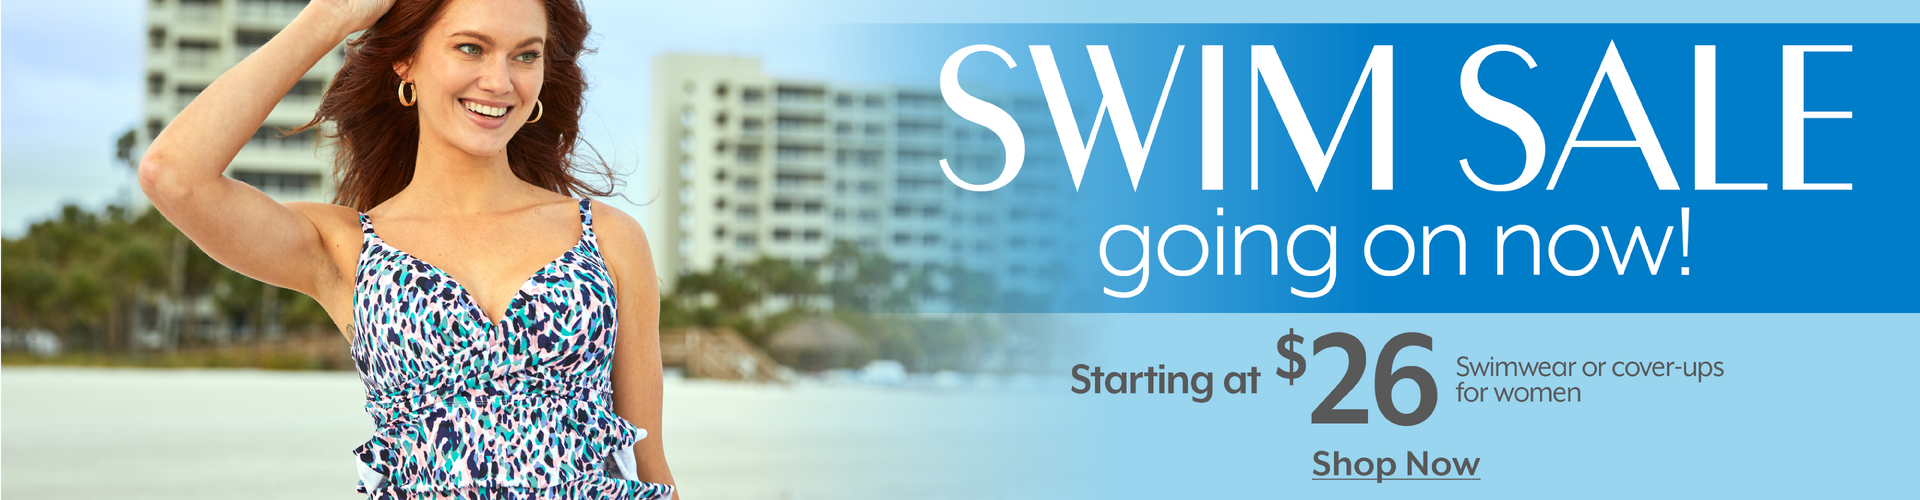 Swim Sale going on now - Starting $26 Swimwear or cover-ups for women